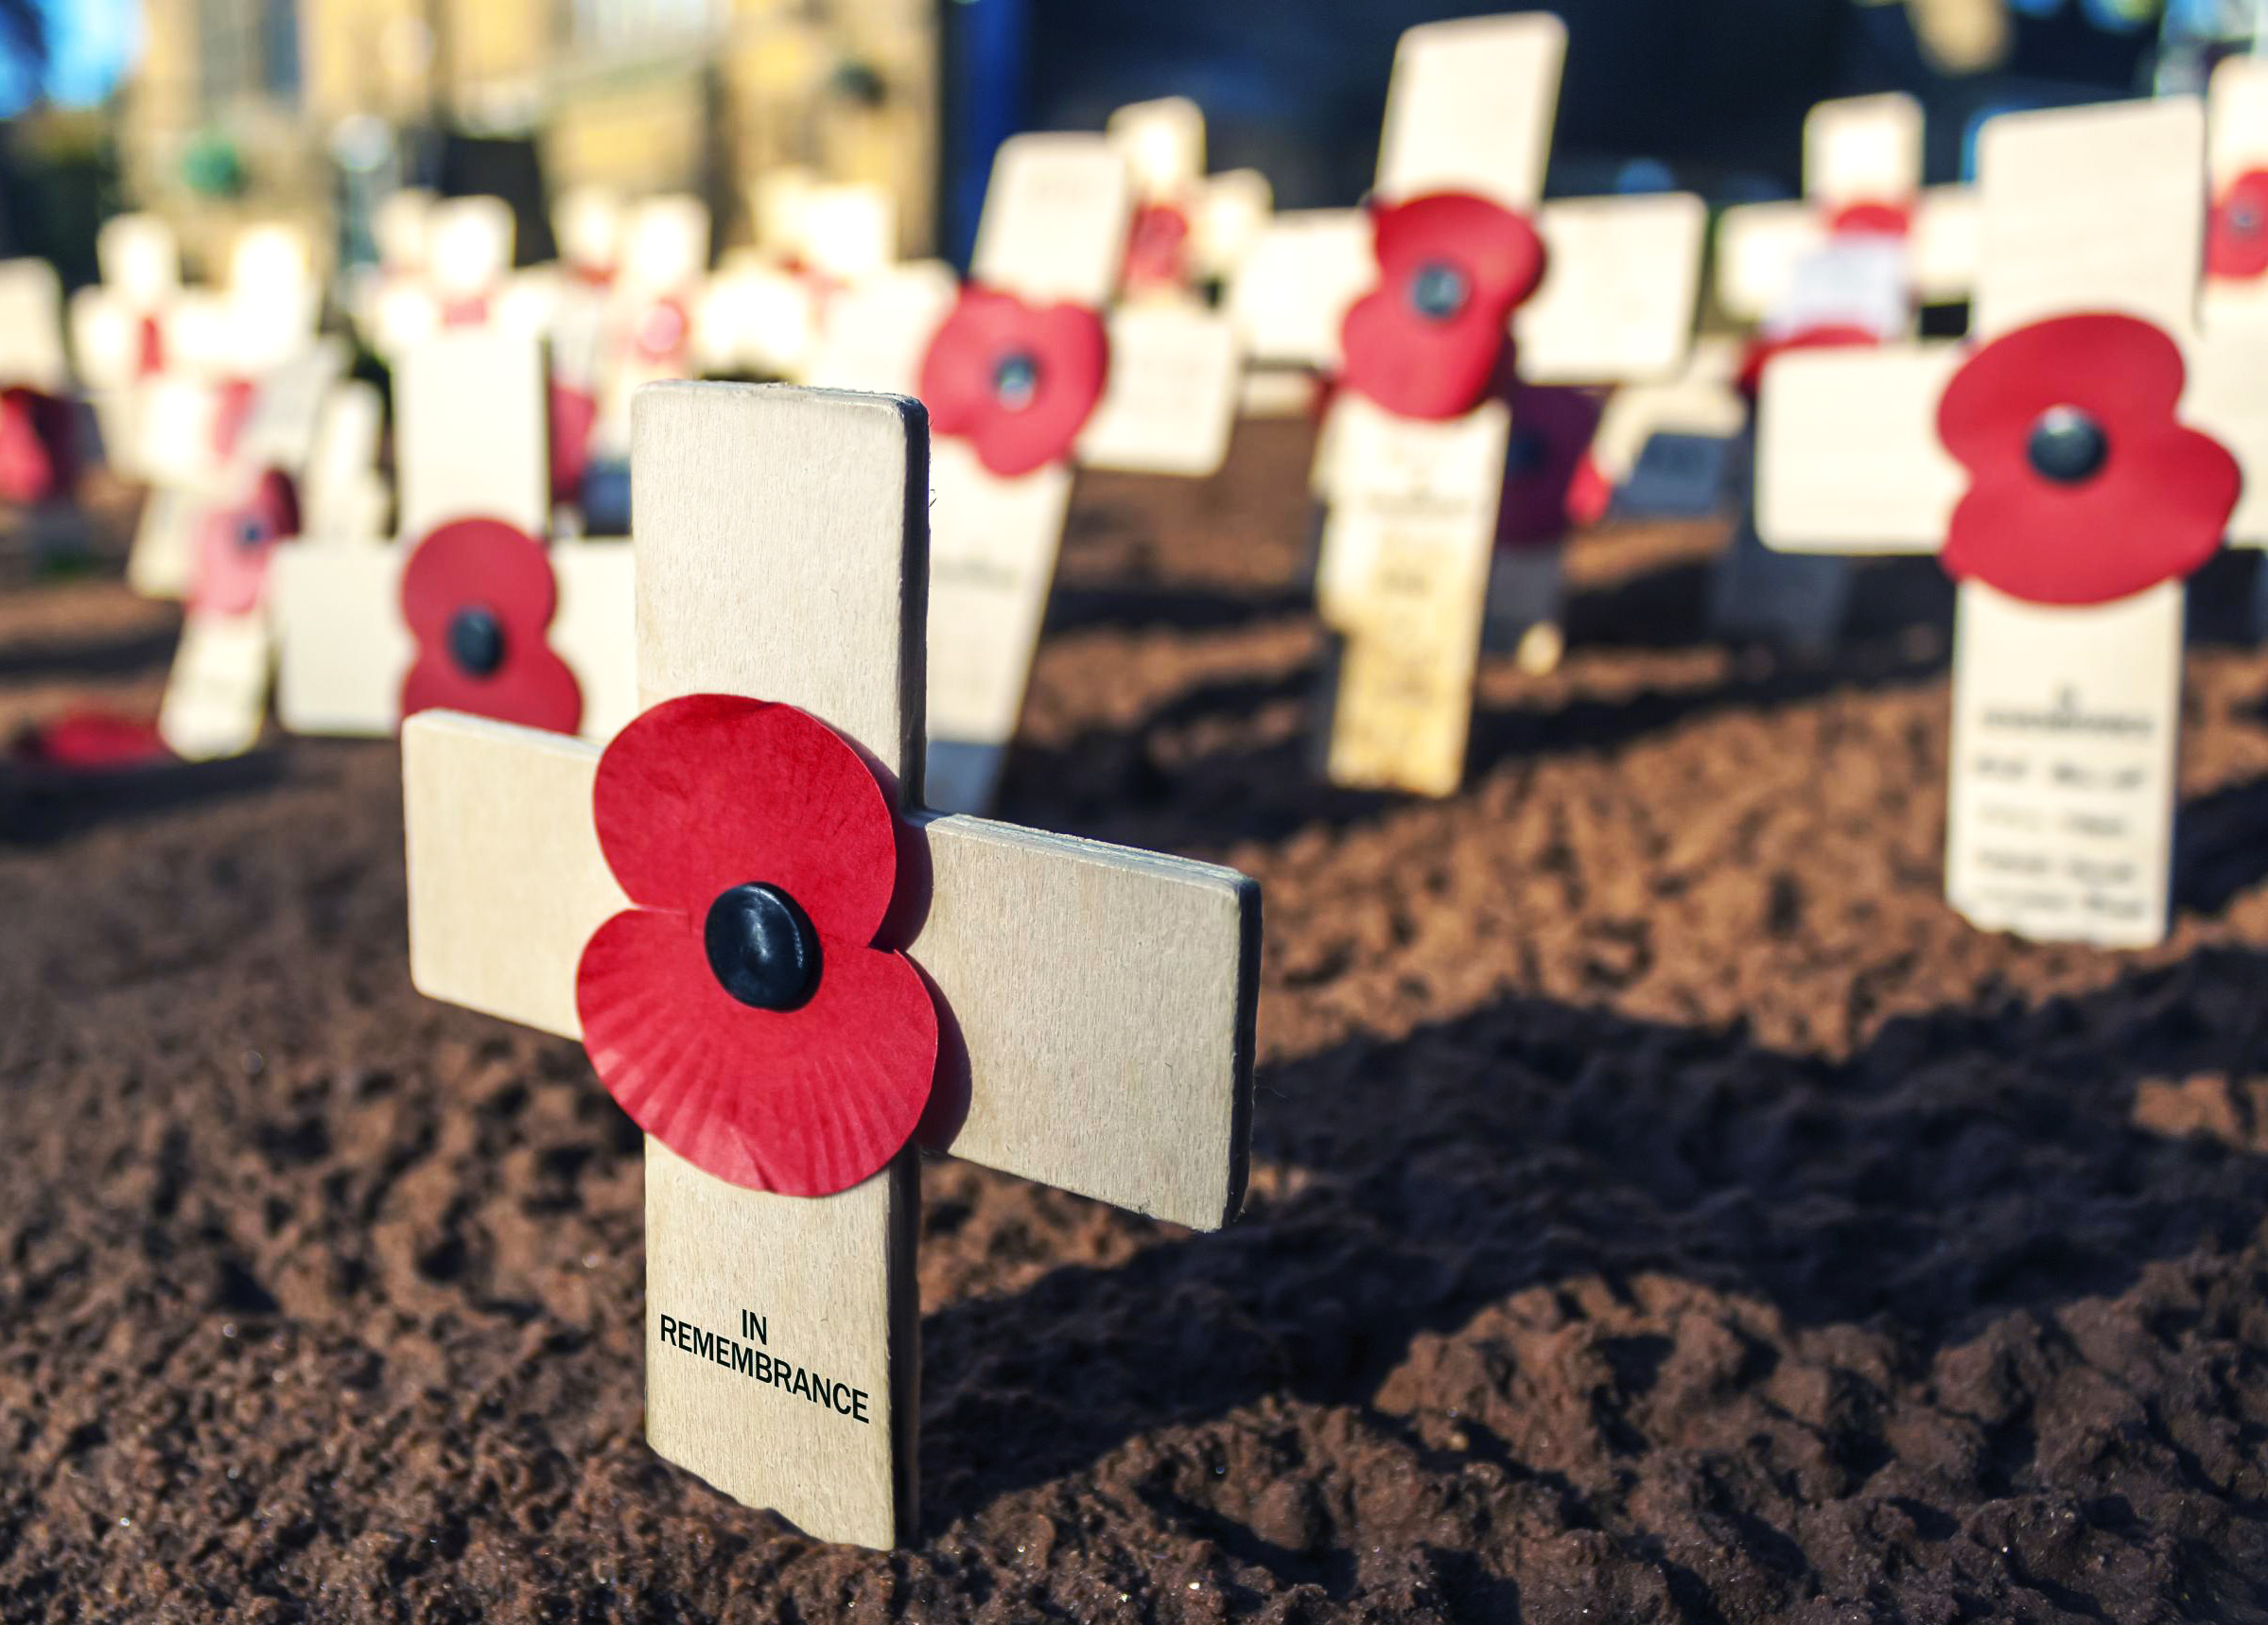 Amateur historians invited to contribute to WWI project